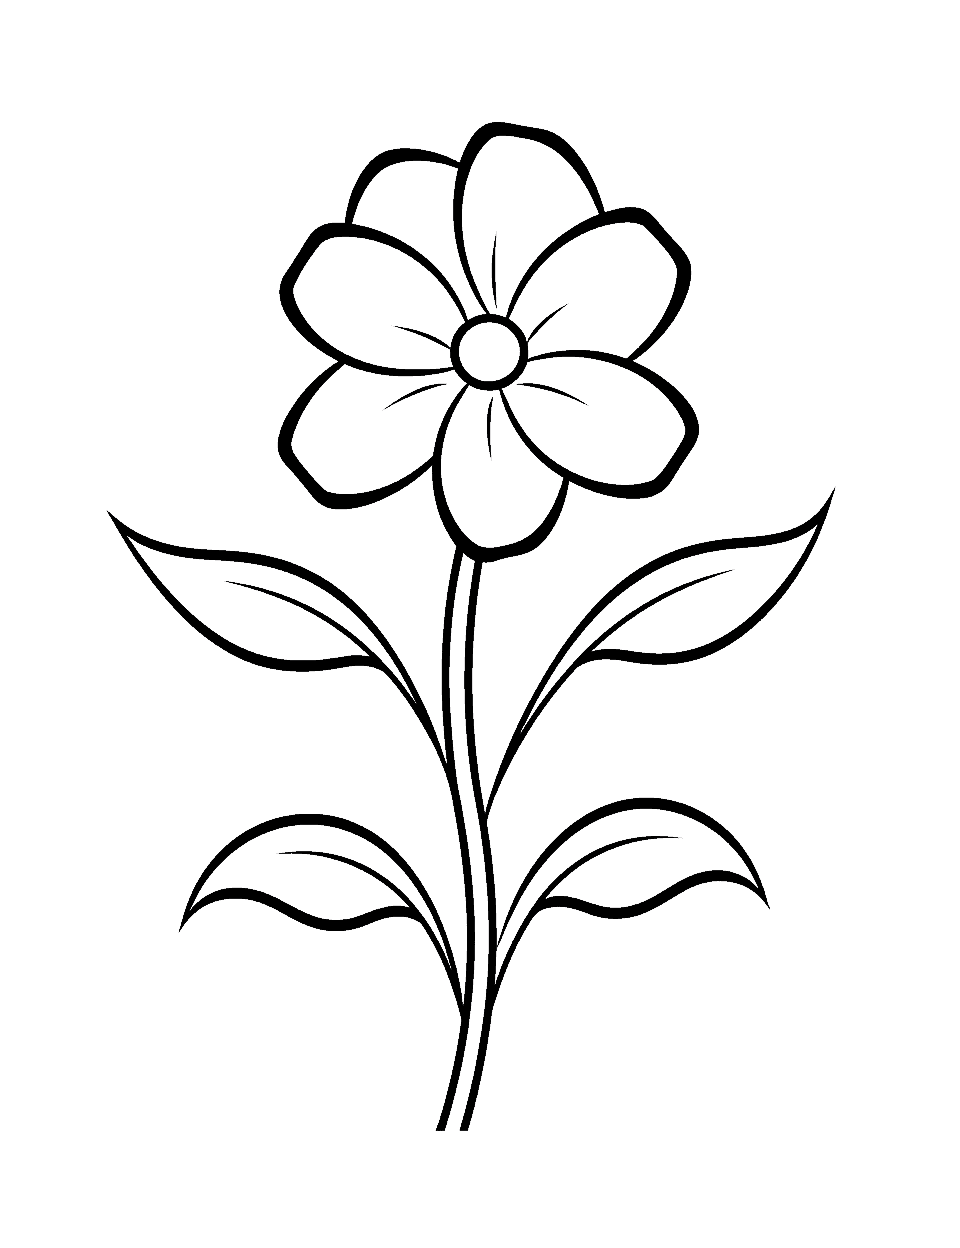 Pretty Flower Drawing for Preschool Coloring Page - A cute and simple flower drawing suitable for preschool kids.